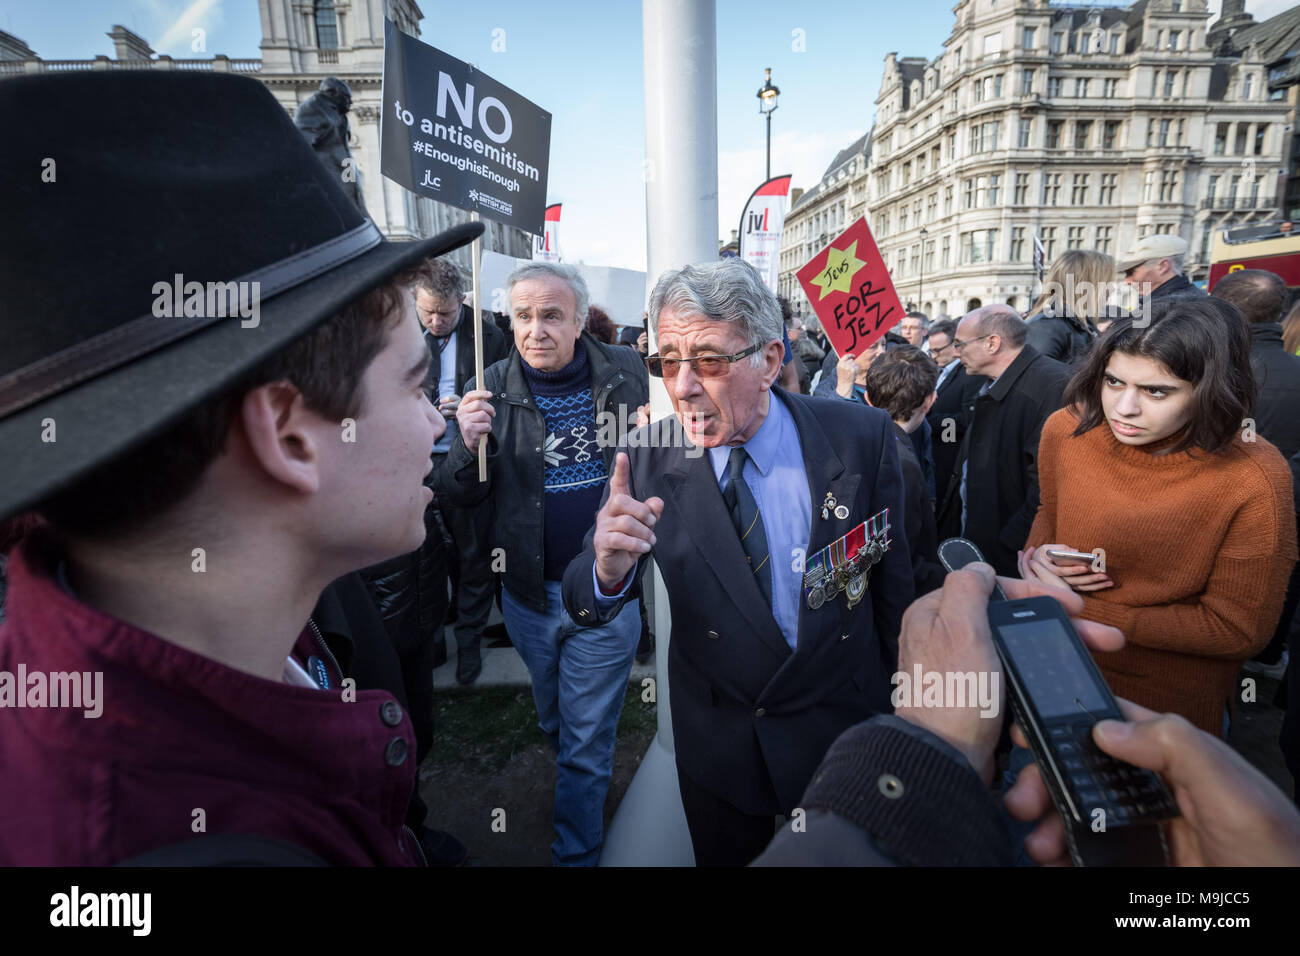 London, UK. 26th March, 2018. A Jewish former member of the armed forces and Labour supporter debates with an outspoken Zionist activist (L) during the protest. Hundreds of protesters, including members of the Jewish community, demonstrate against antisemitism in Parliament Square. Labour leader Jeremy Corbyn has conceded that there is a problem with antisemitism within the Labour party that the party has still yet to resolve. Credit: Guy Corbishley/Alamy Live News Stock Photo